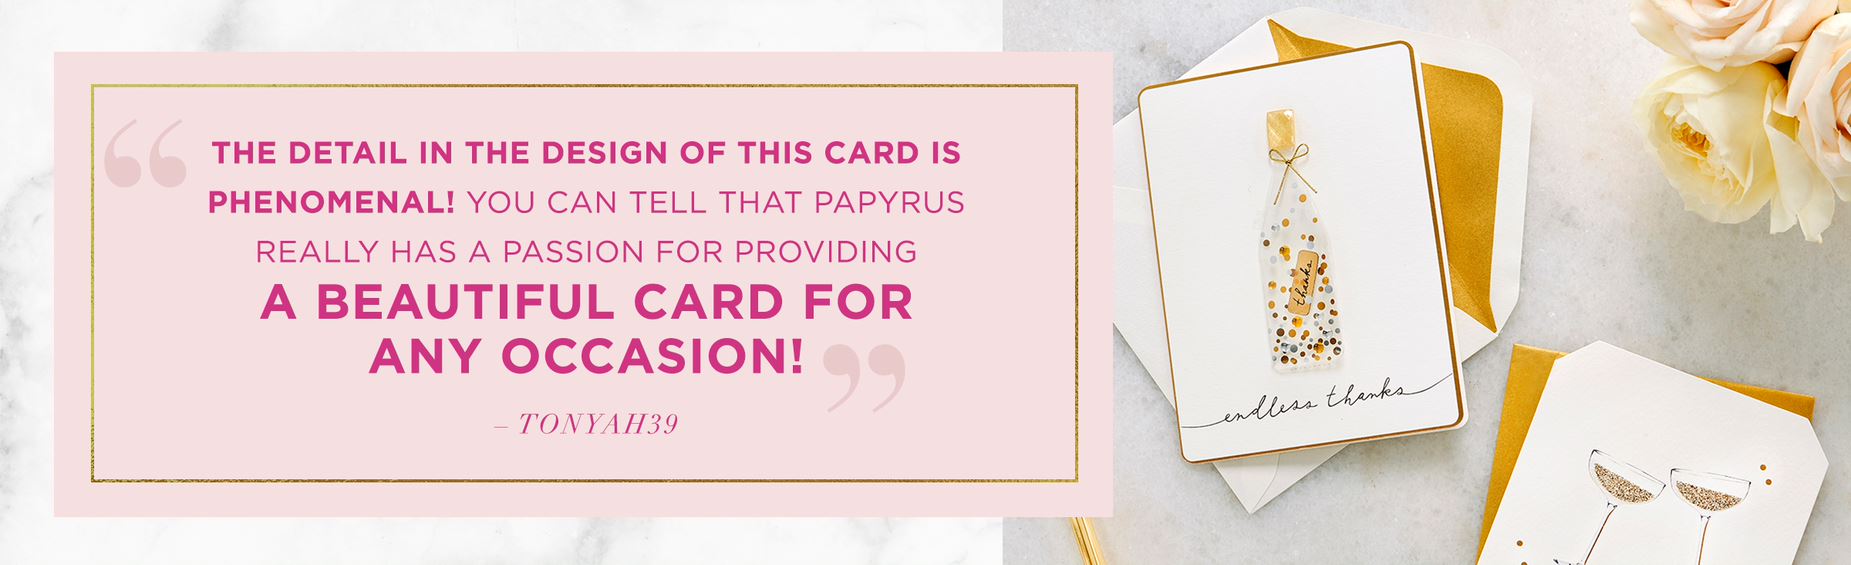 The detail in the design of this card is phenomenal! You can tell that Papyrus really has a passion for providing a beautiful card for any occasion